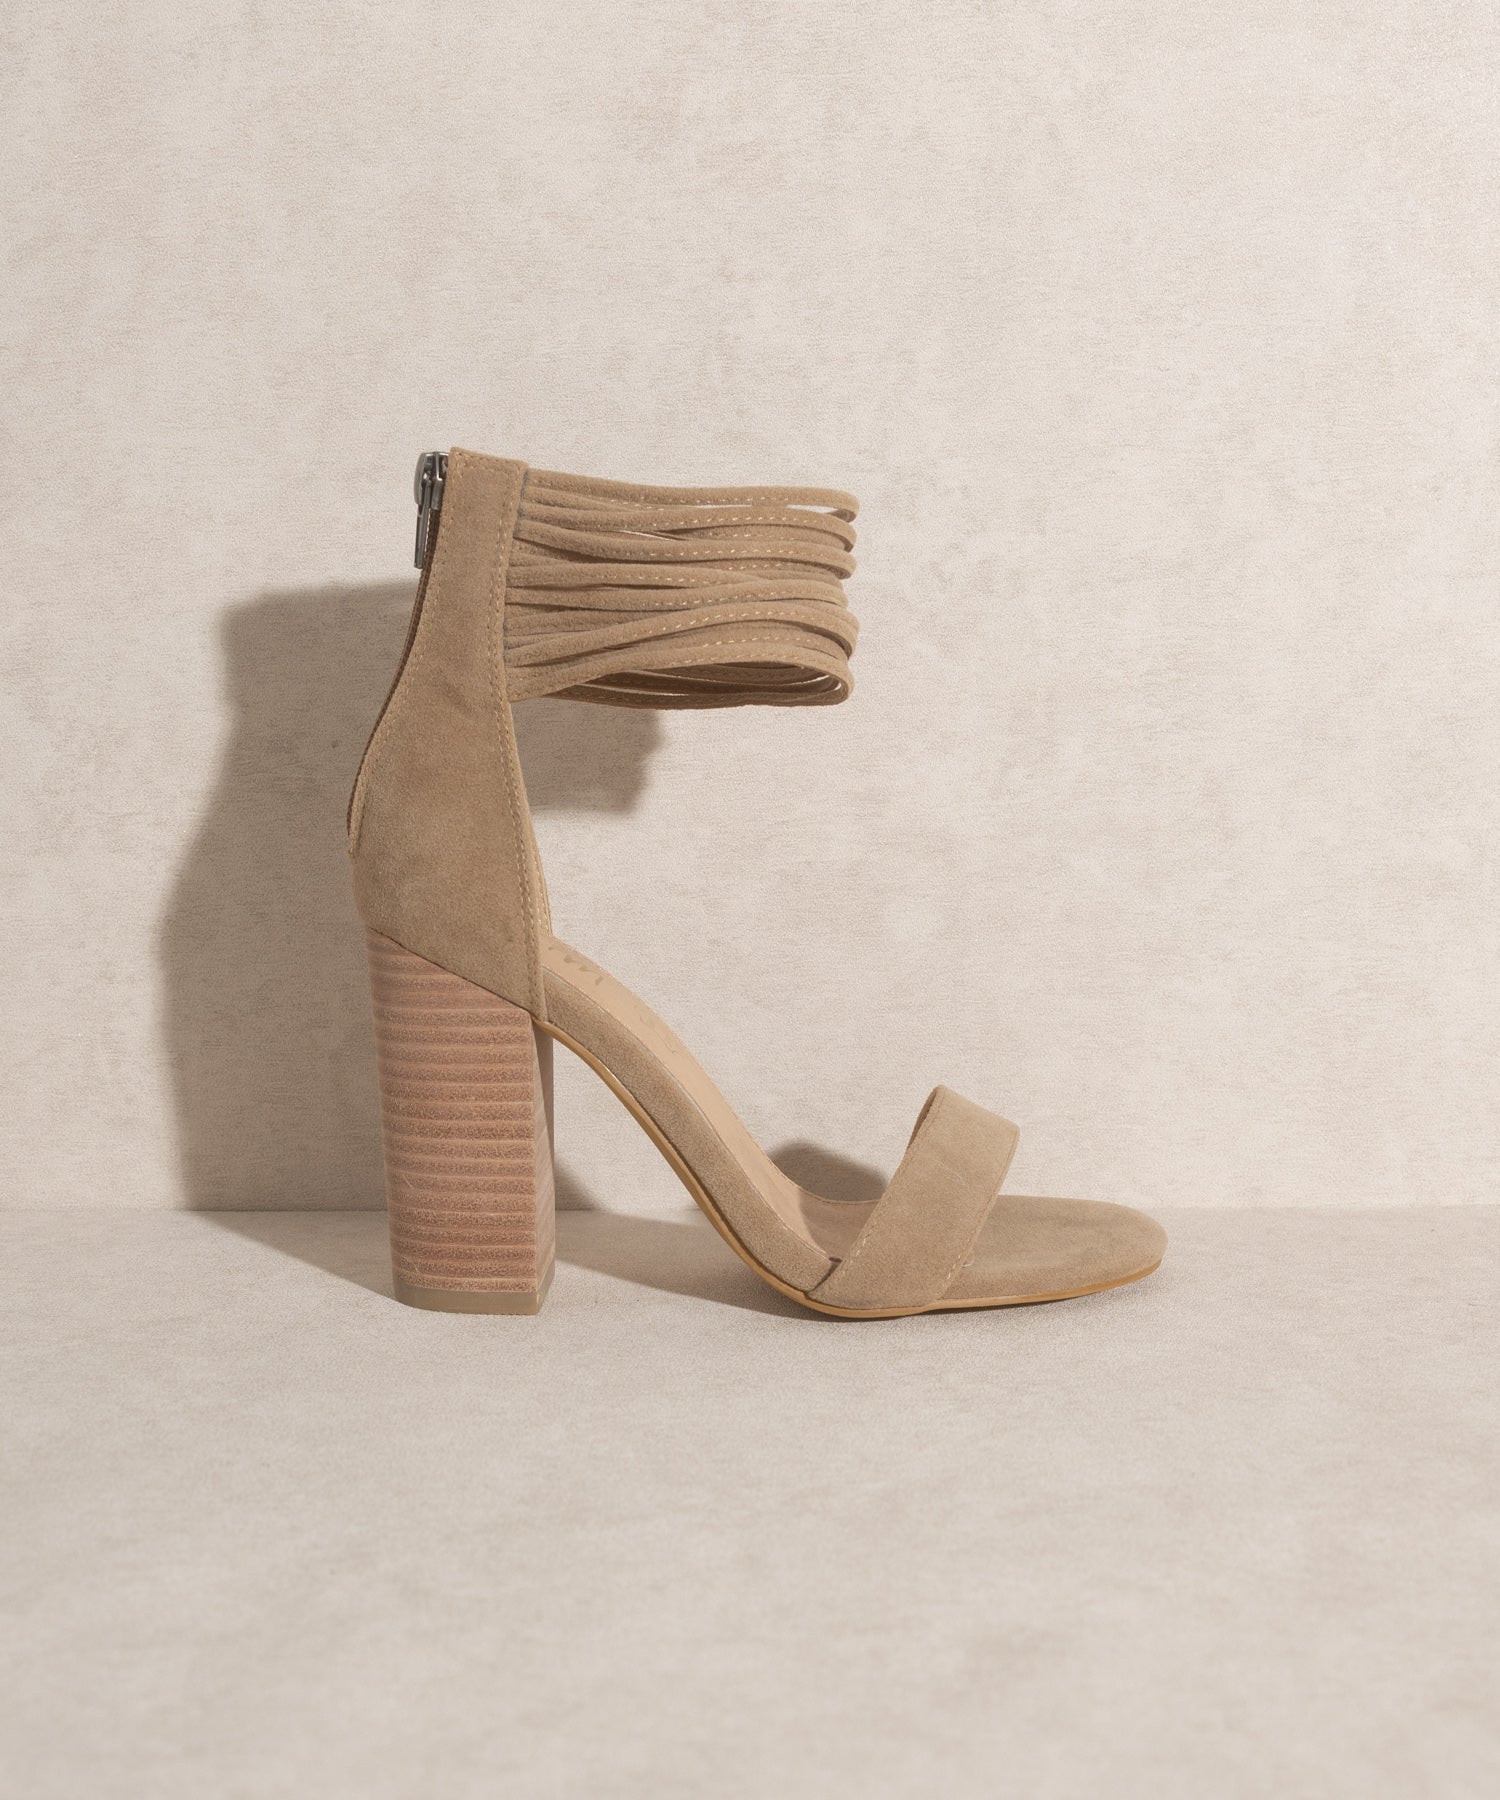 Blakely Strapped Heels in Suede Khaki